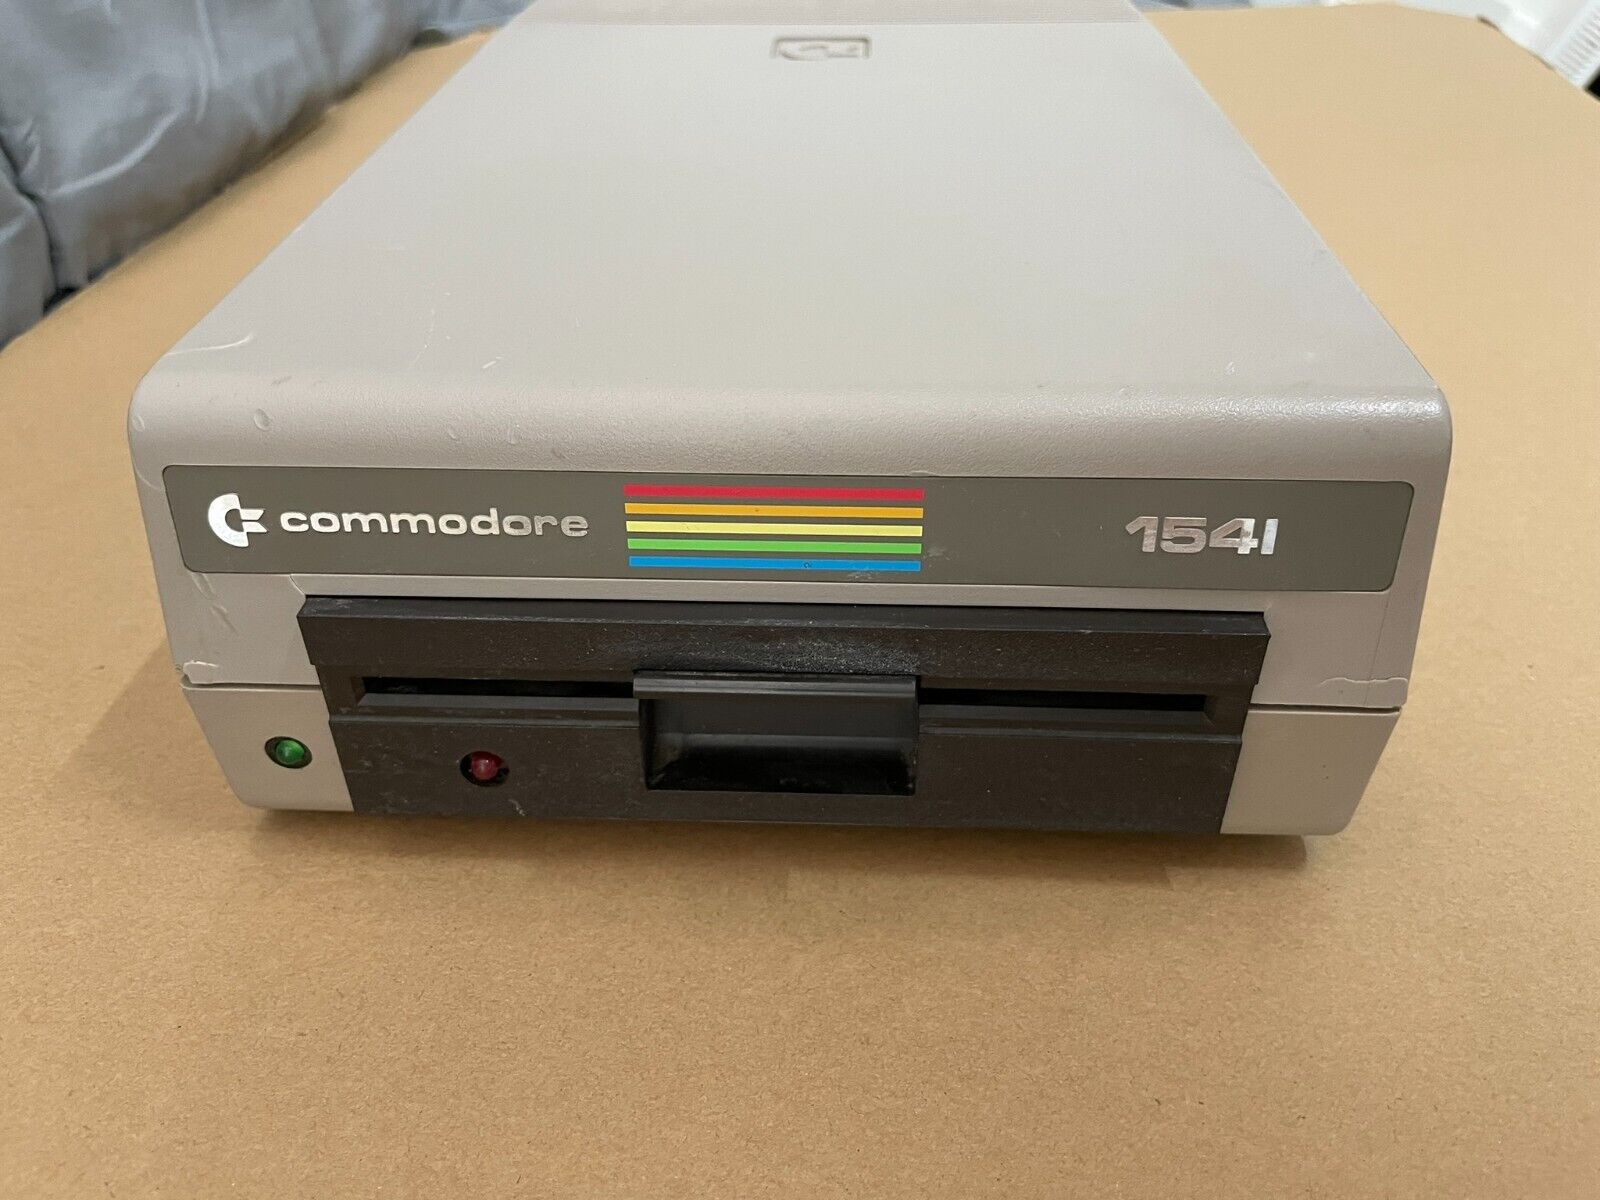 Commodore 1541 Single Drive Floppy Disk cleaned and tested